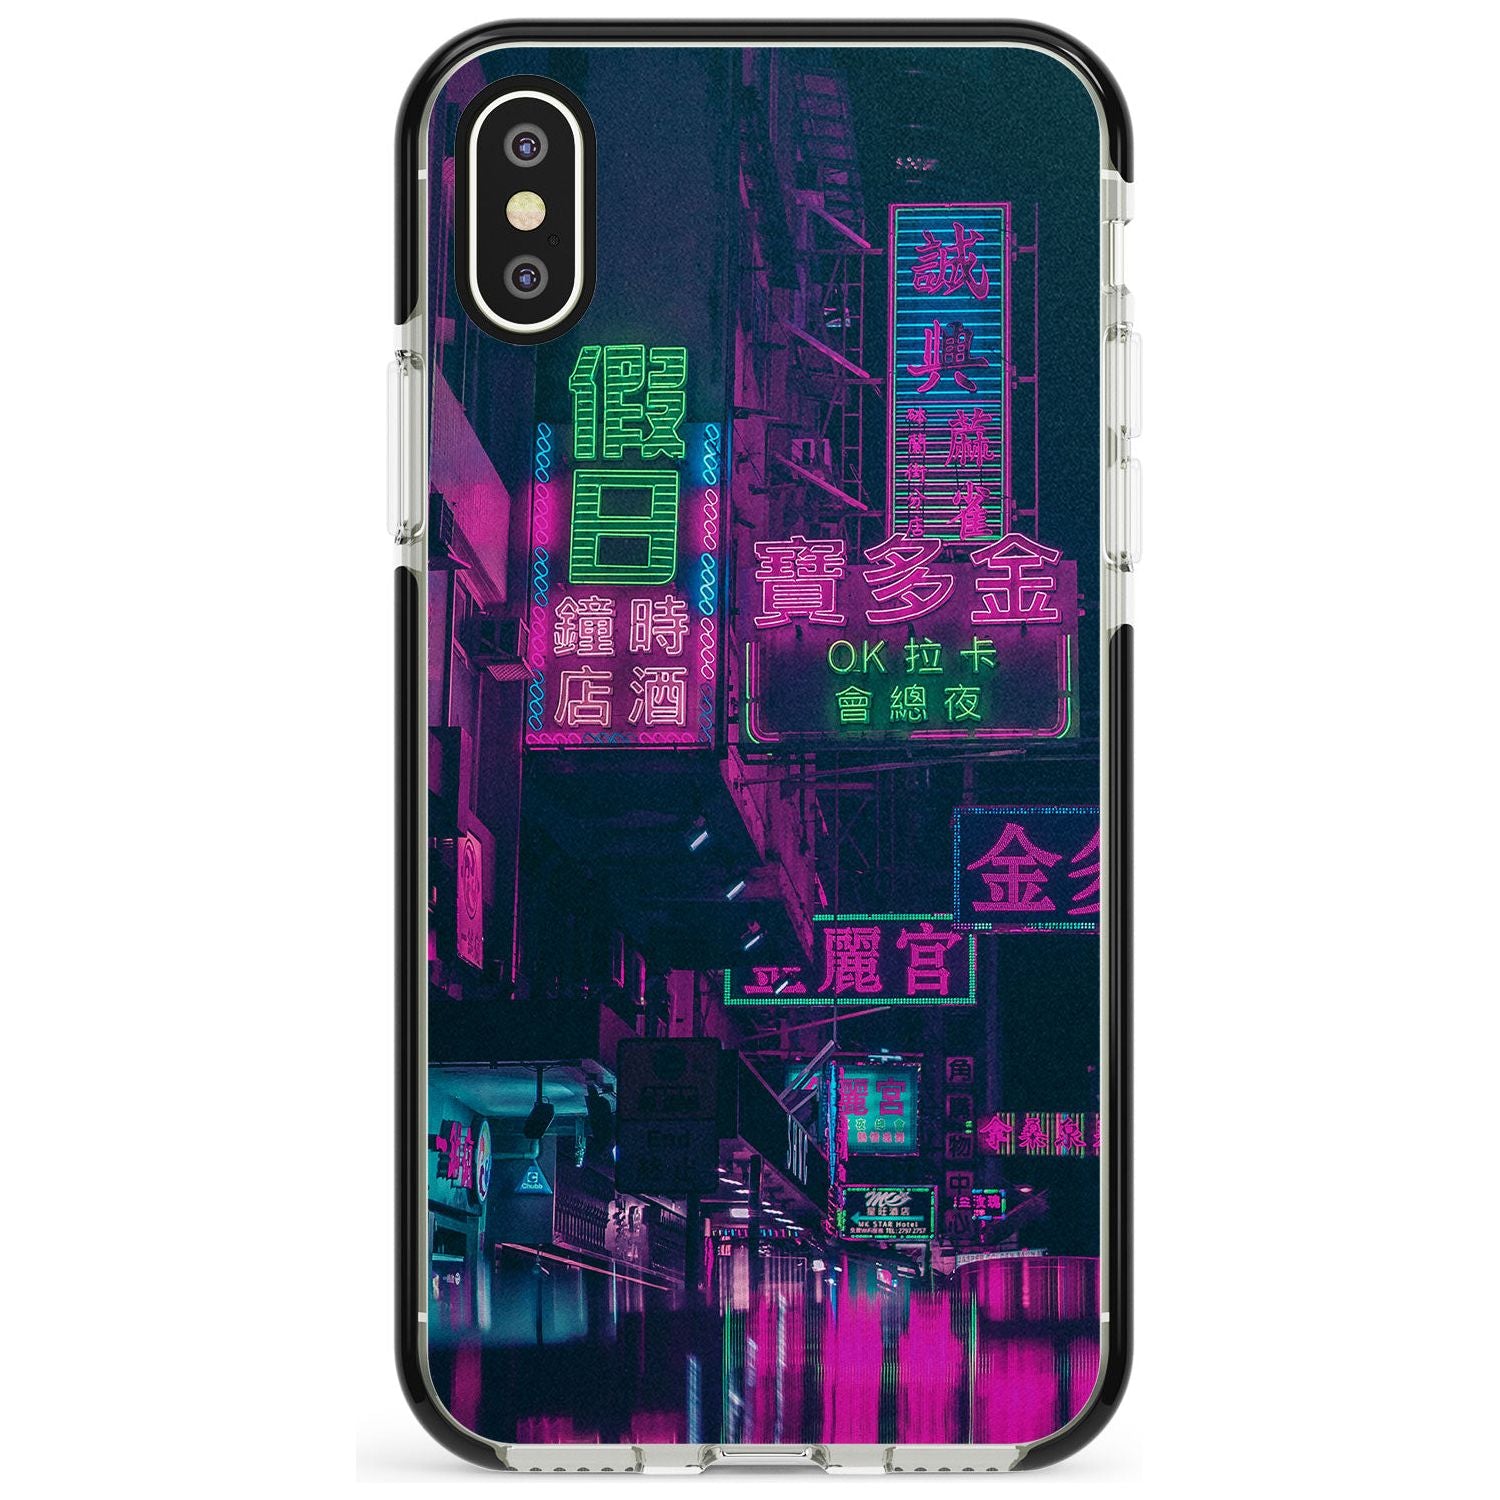 Rainy Reflections - Neon Cities Photographs Black Impact Phone Case for iPhone X XS Max XR